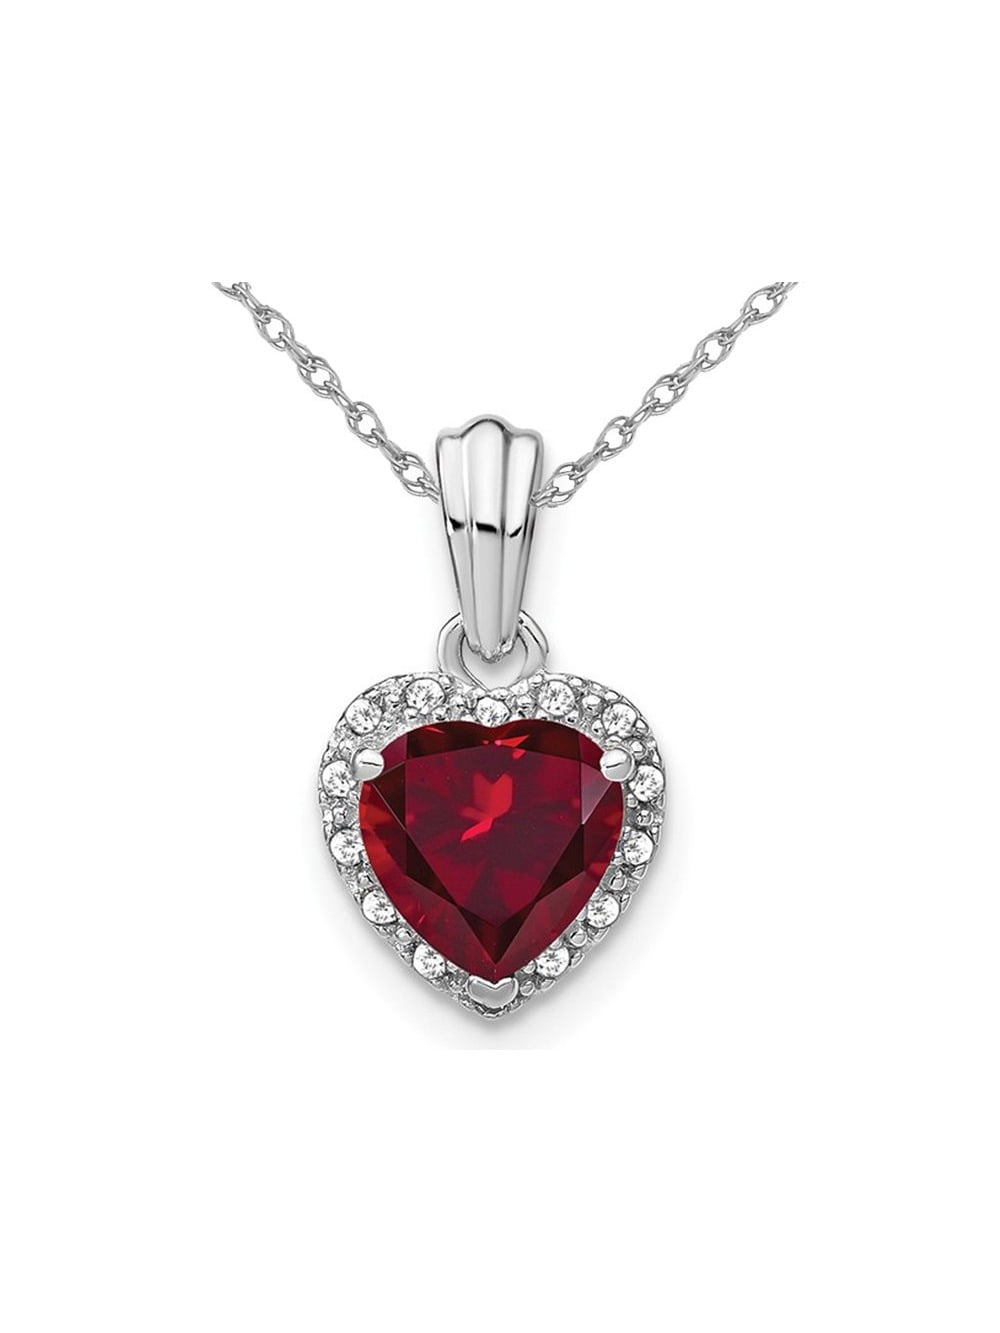 Sparkling Heart Ruby Necklace Pendant Women Jewelry Solid Silver Summer  Sale | eBay